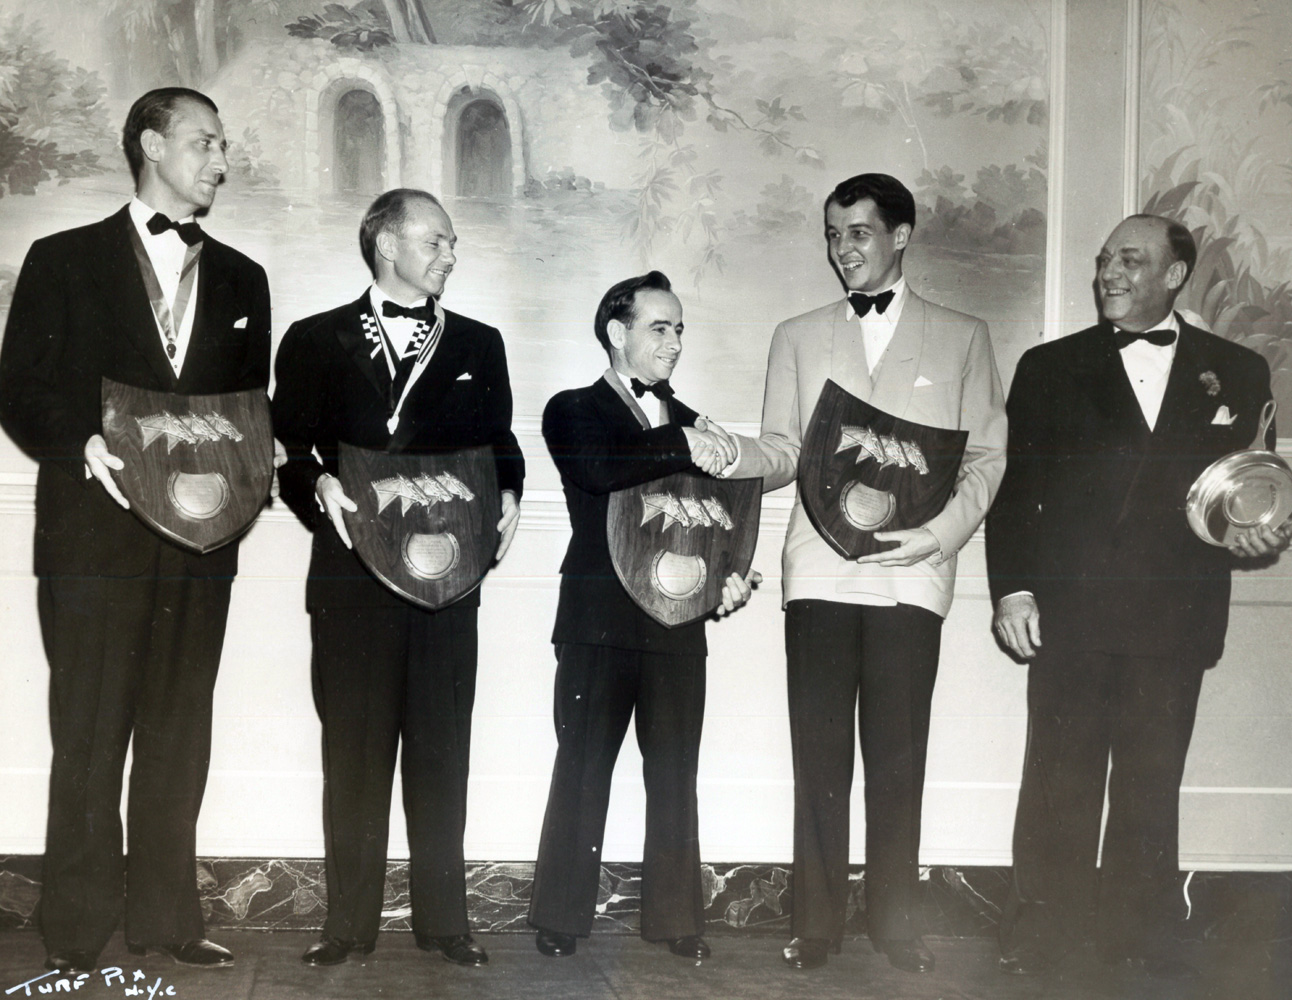 Alex Robb, Earl Sande, John Longden, Alfred G. Vanderbilt II, and G. Lamaze receive awards at the 9th annual Turf Writers Dinner at Saratoga in 1939 (TurfPix/Museum Collection)